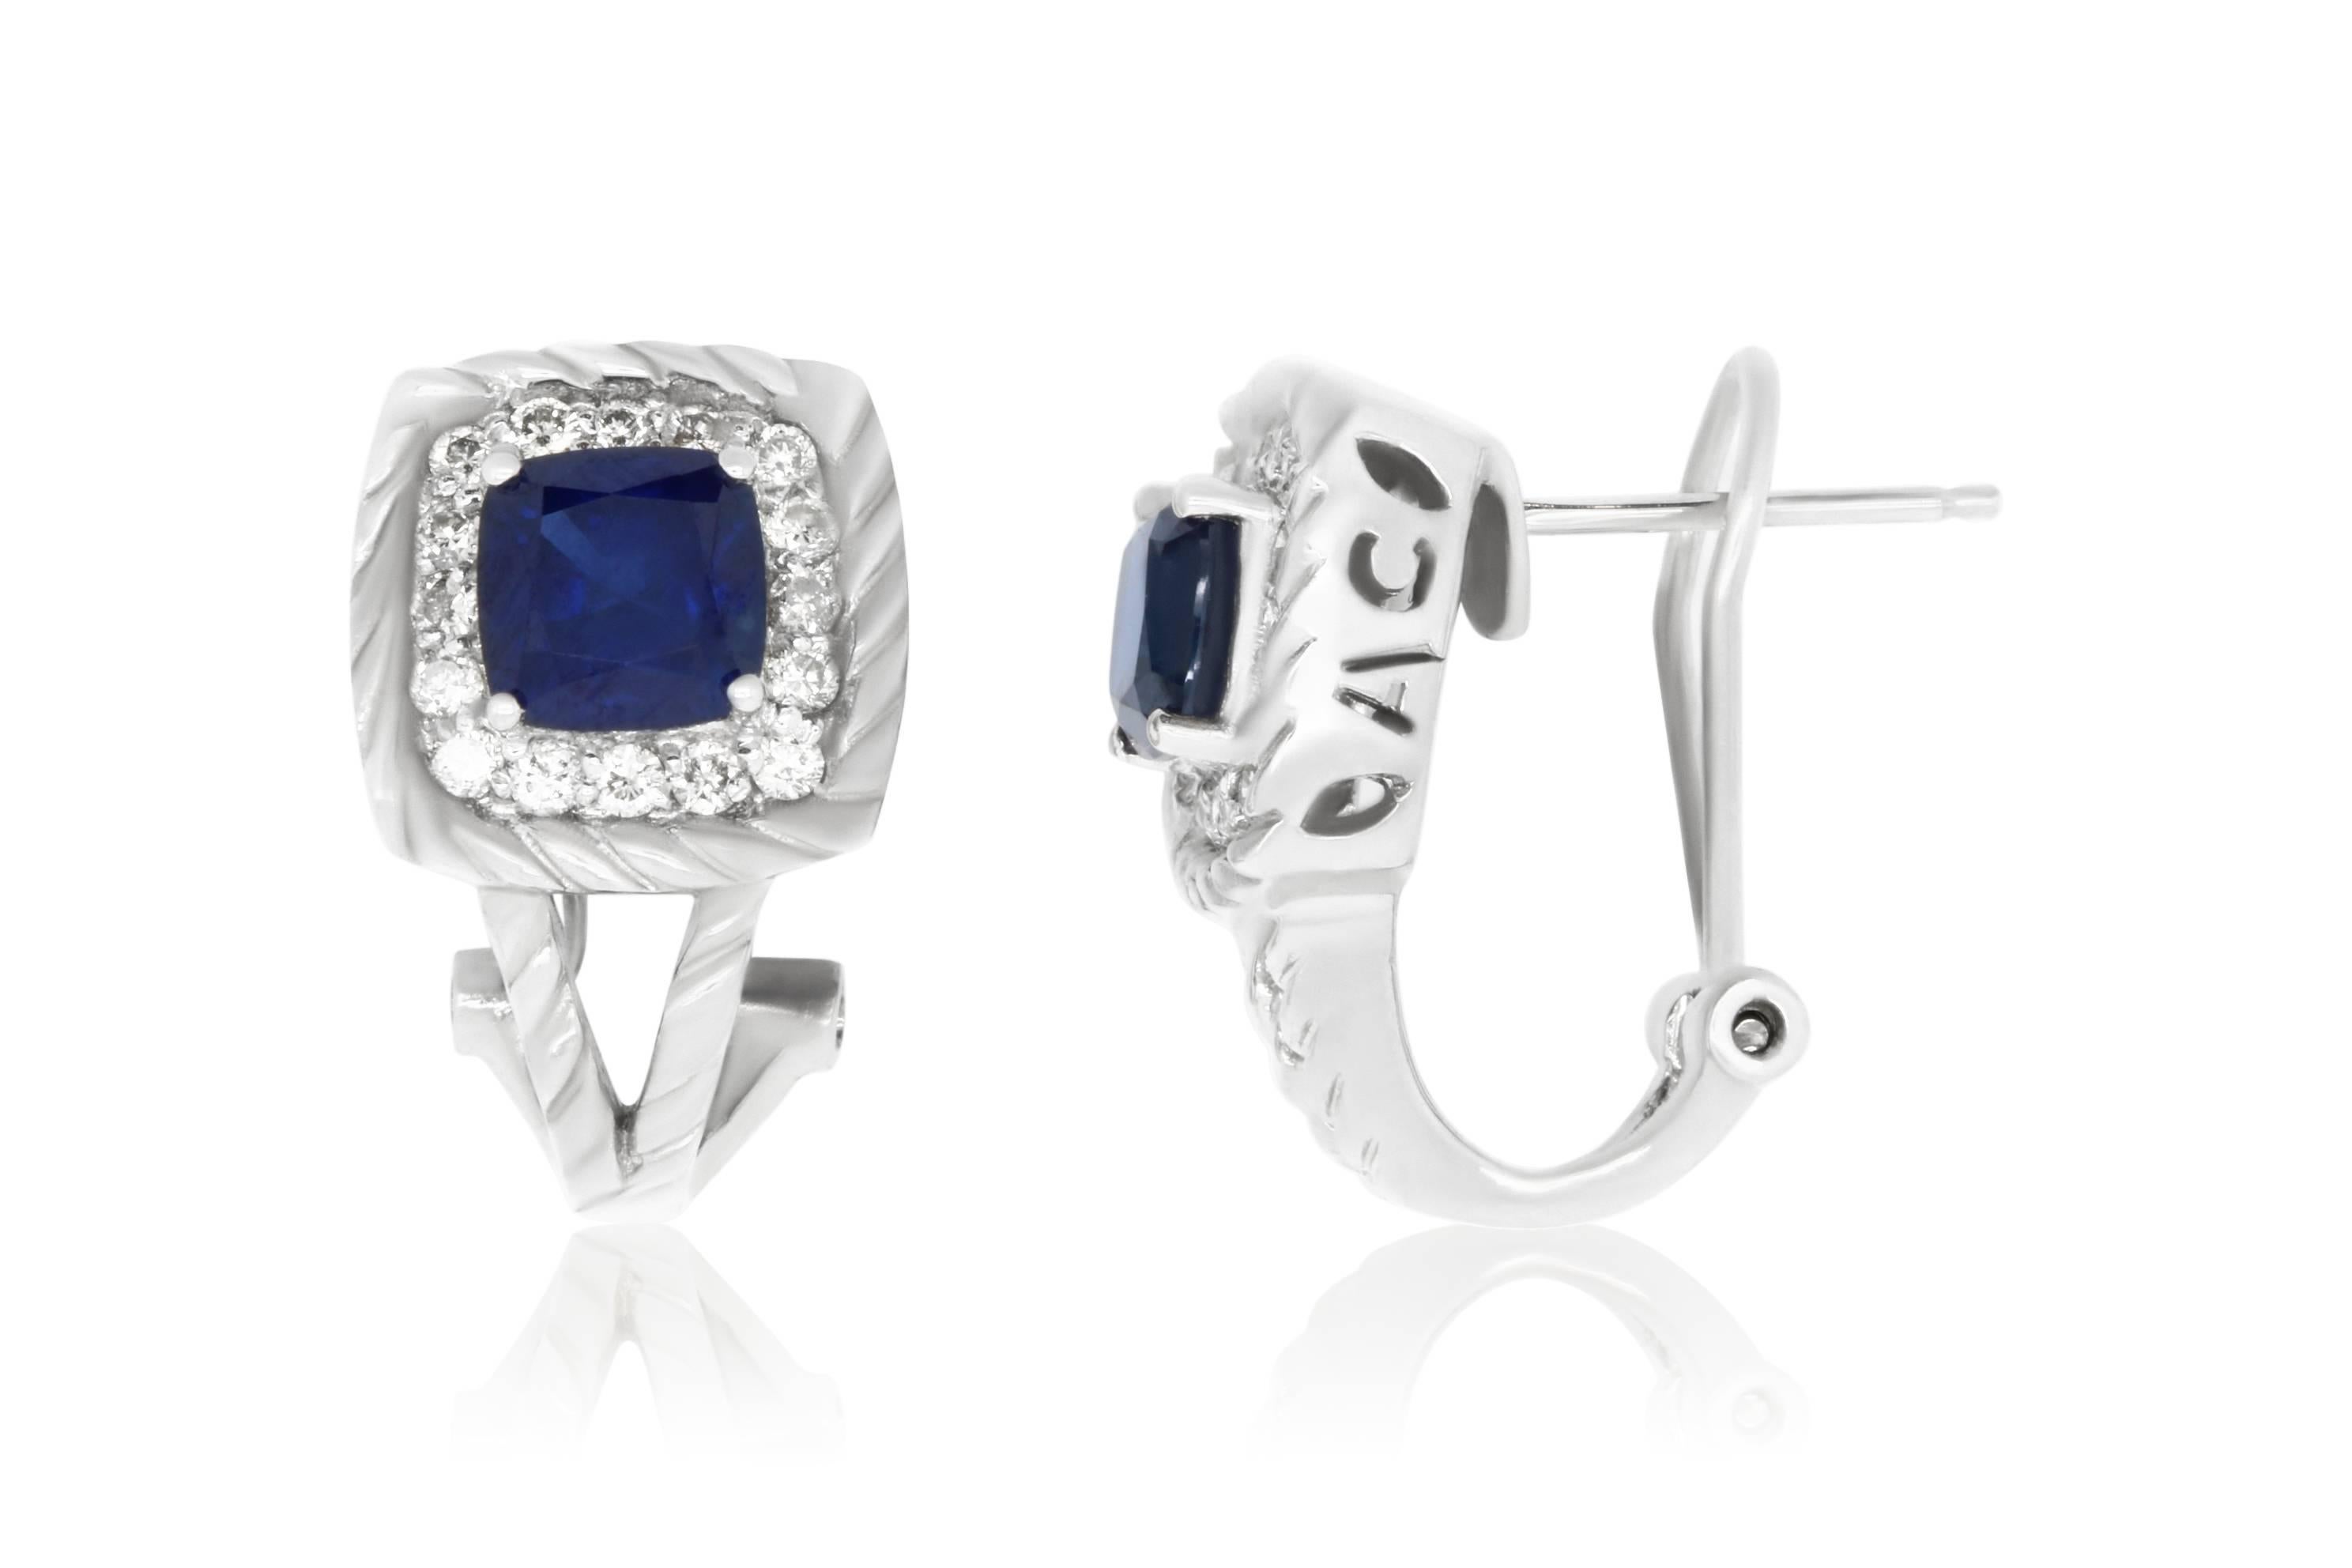 Material: 14k White Gold 
Stone Details: 2 Cushion Blue Sapphires at 2.95 Carats Total
32 Round White Diamonds at .55 Carats. Clarity: SI / Color: H-I

Fine one-of-a kind craftsmanship meets incredible quality in this breathtaking piece of